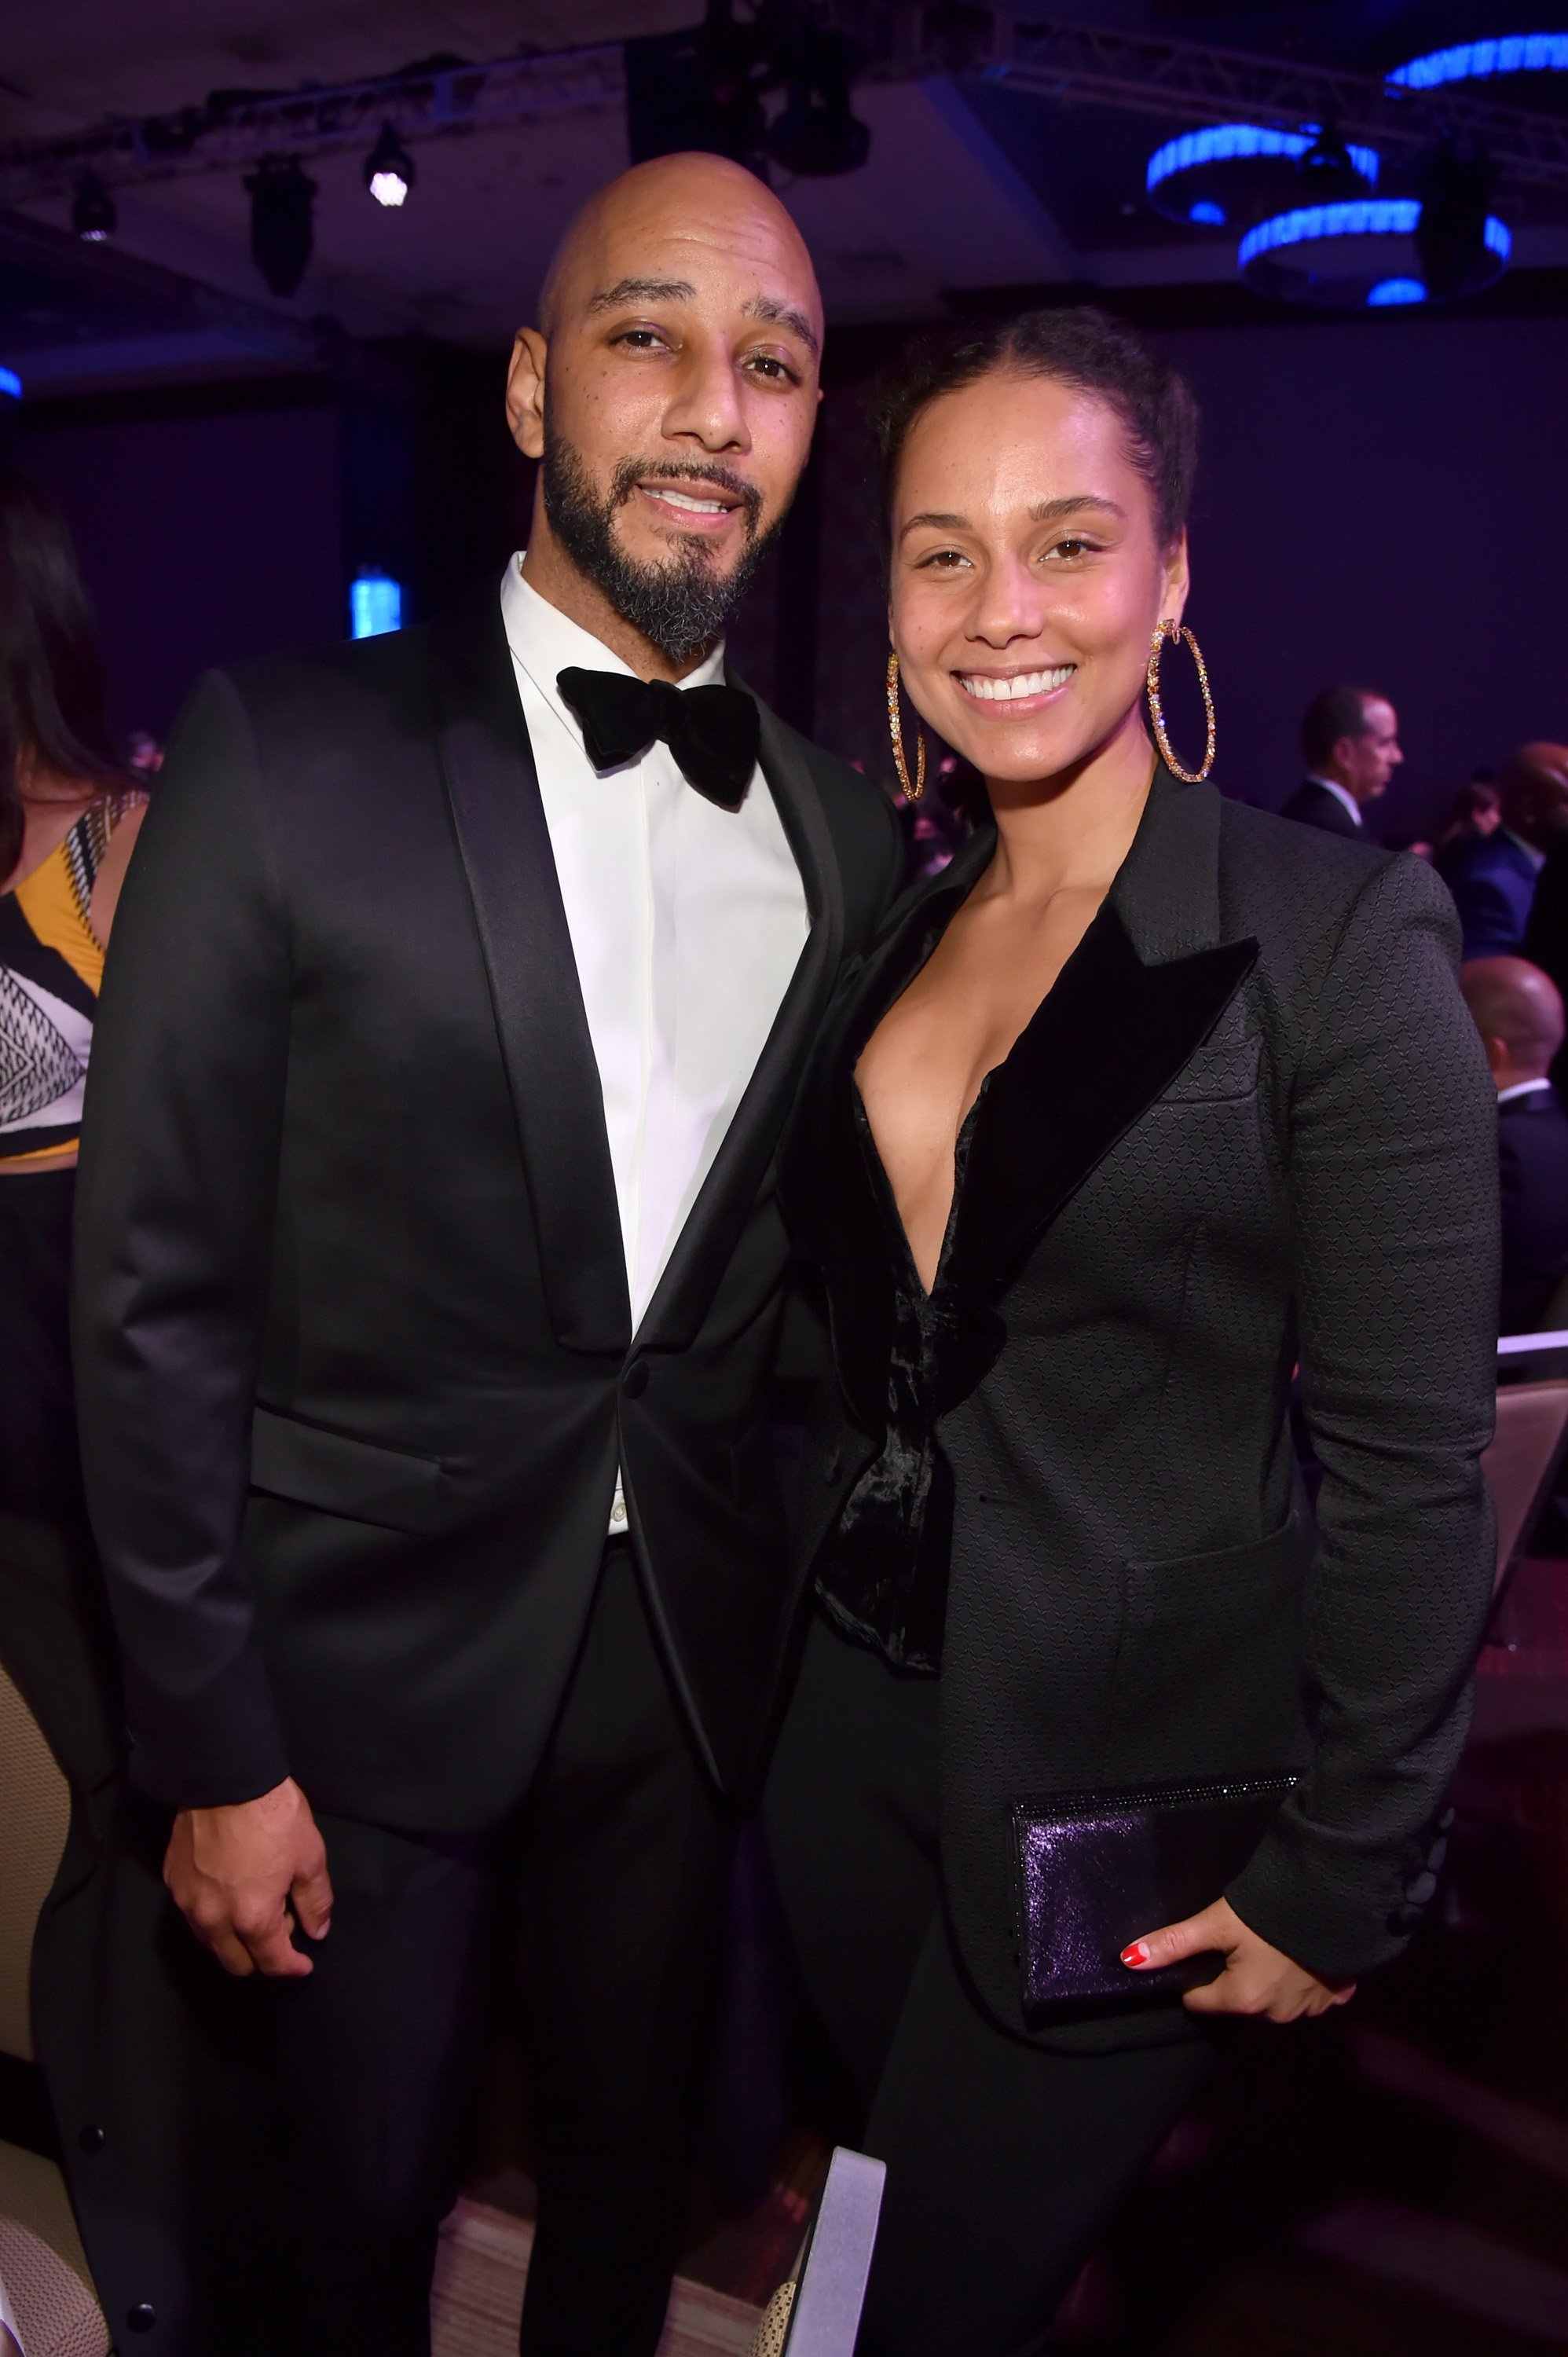 Husband and wife musical artists Swizz Beatz and Alicia Keys at a Pre-Grammy gala in January 2018. | Photo: Getty Images